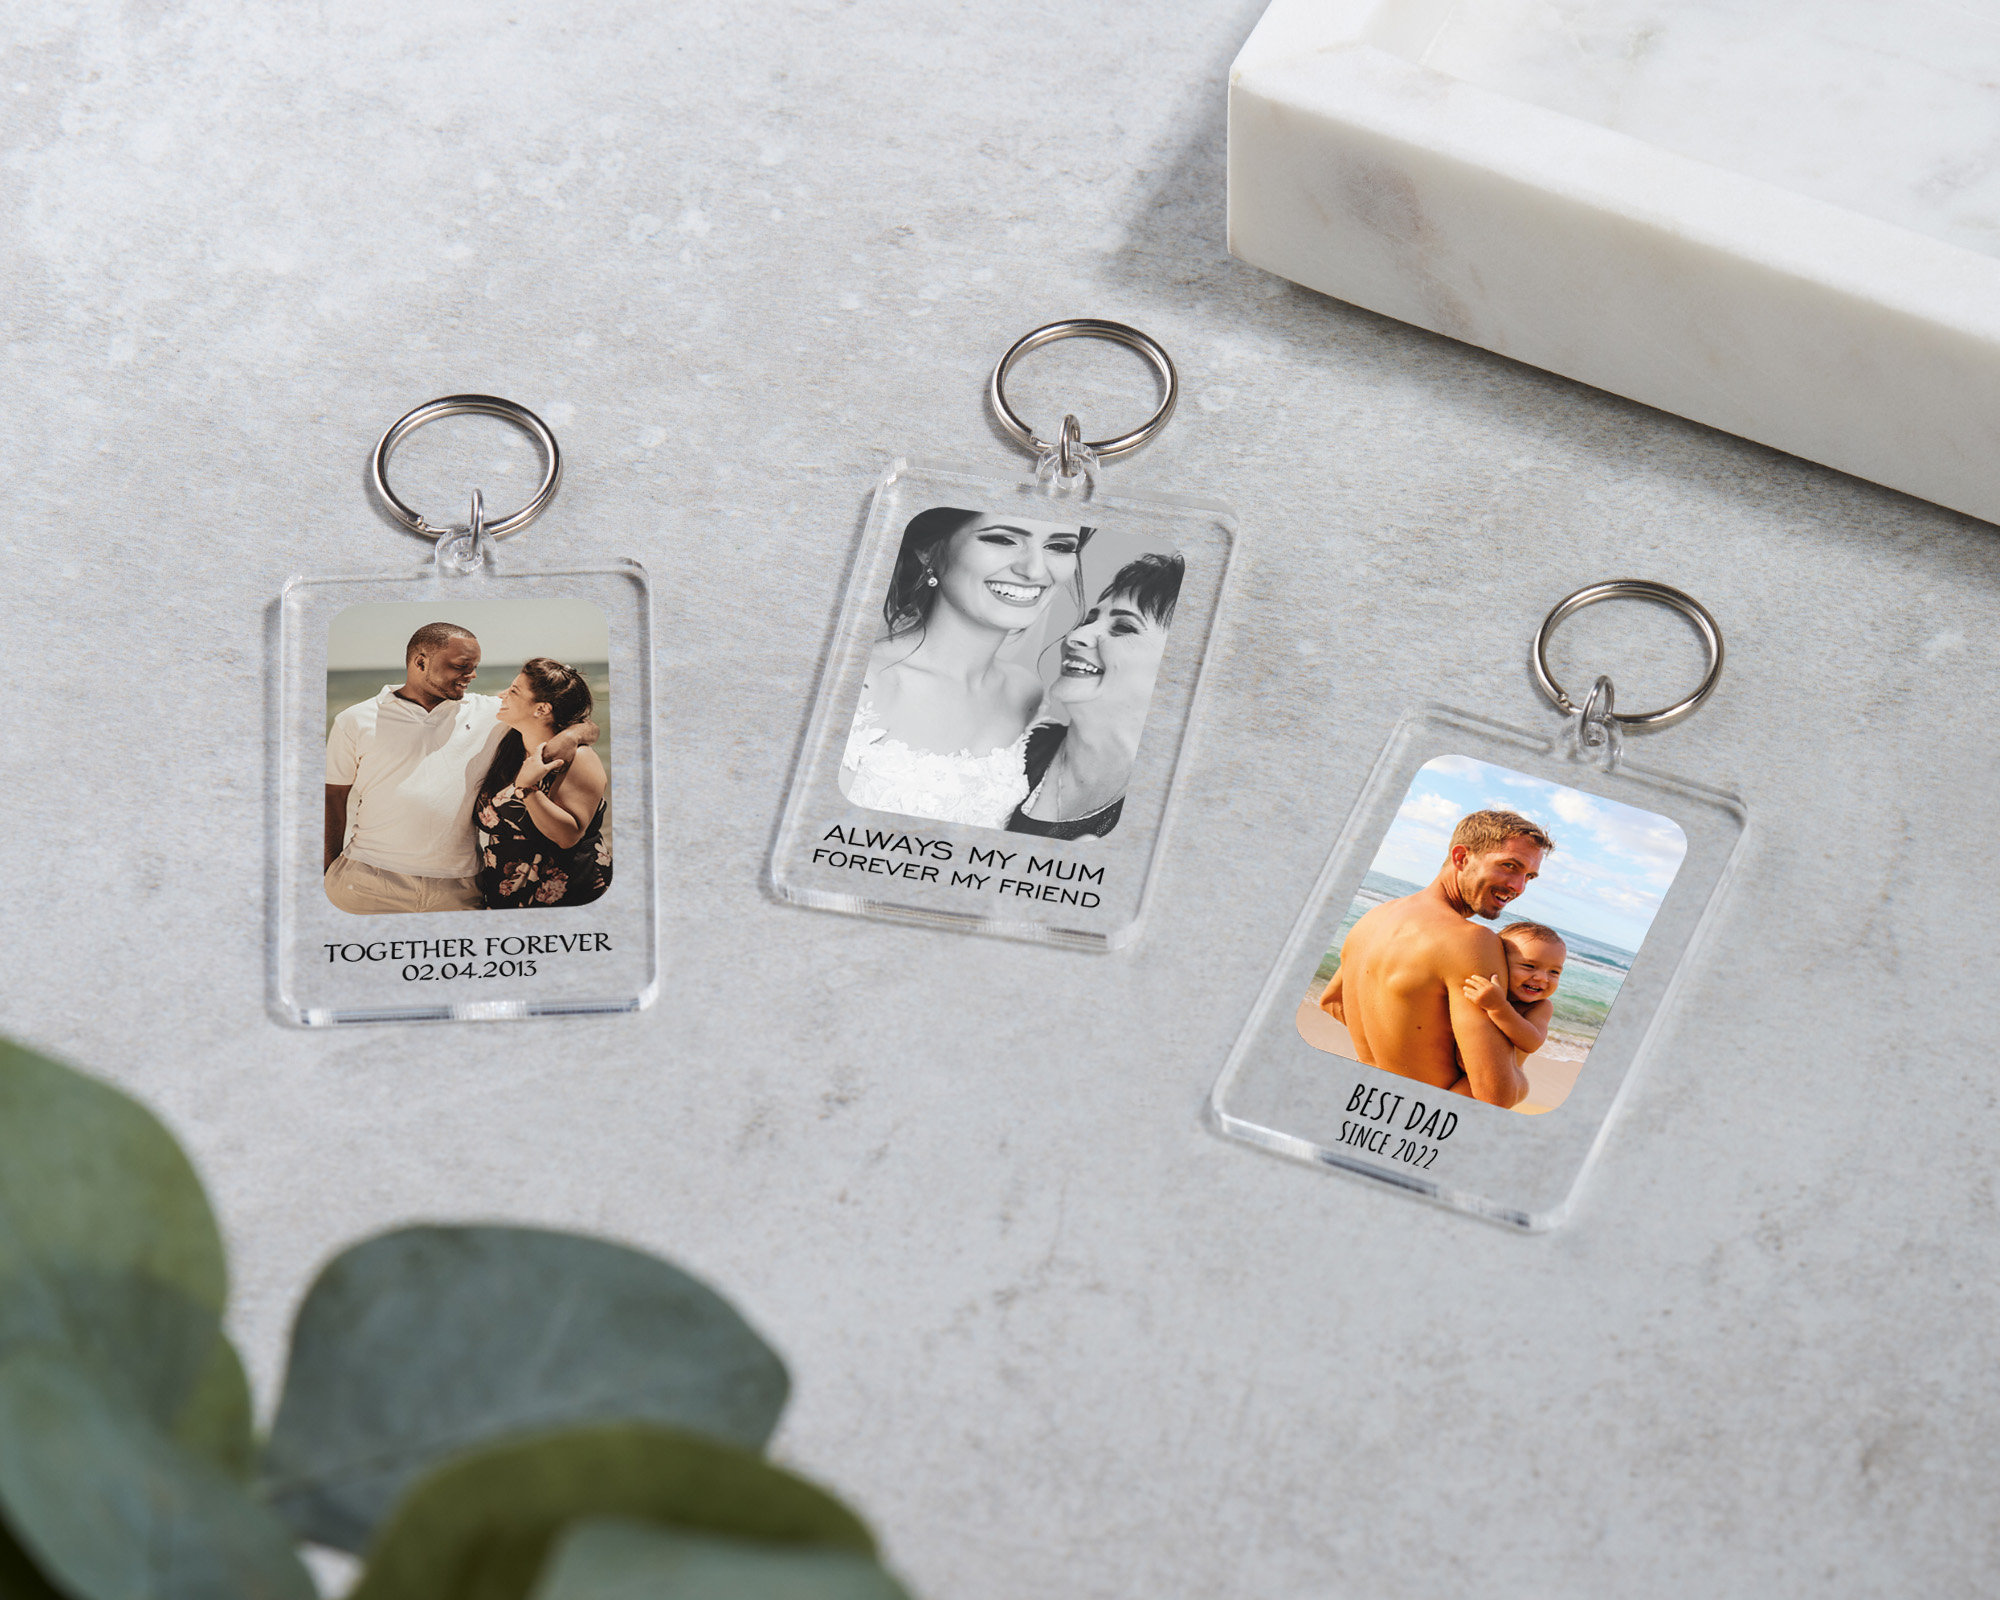 Personalised Photo Keyring, Keychain Gift with Message for Birthday, Anniversary, Valentines, Christmas Gift